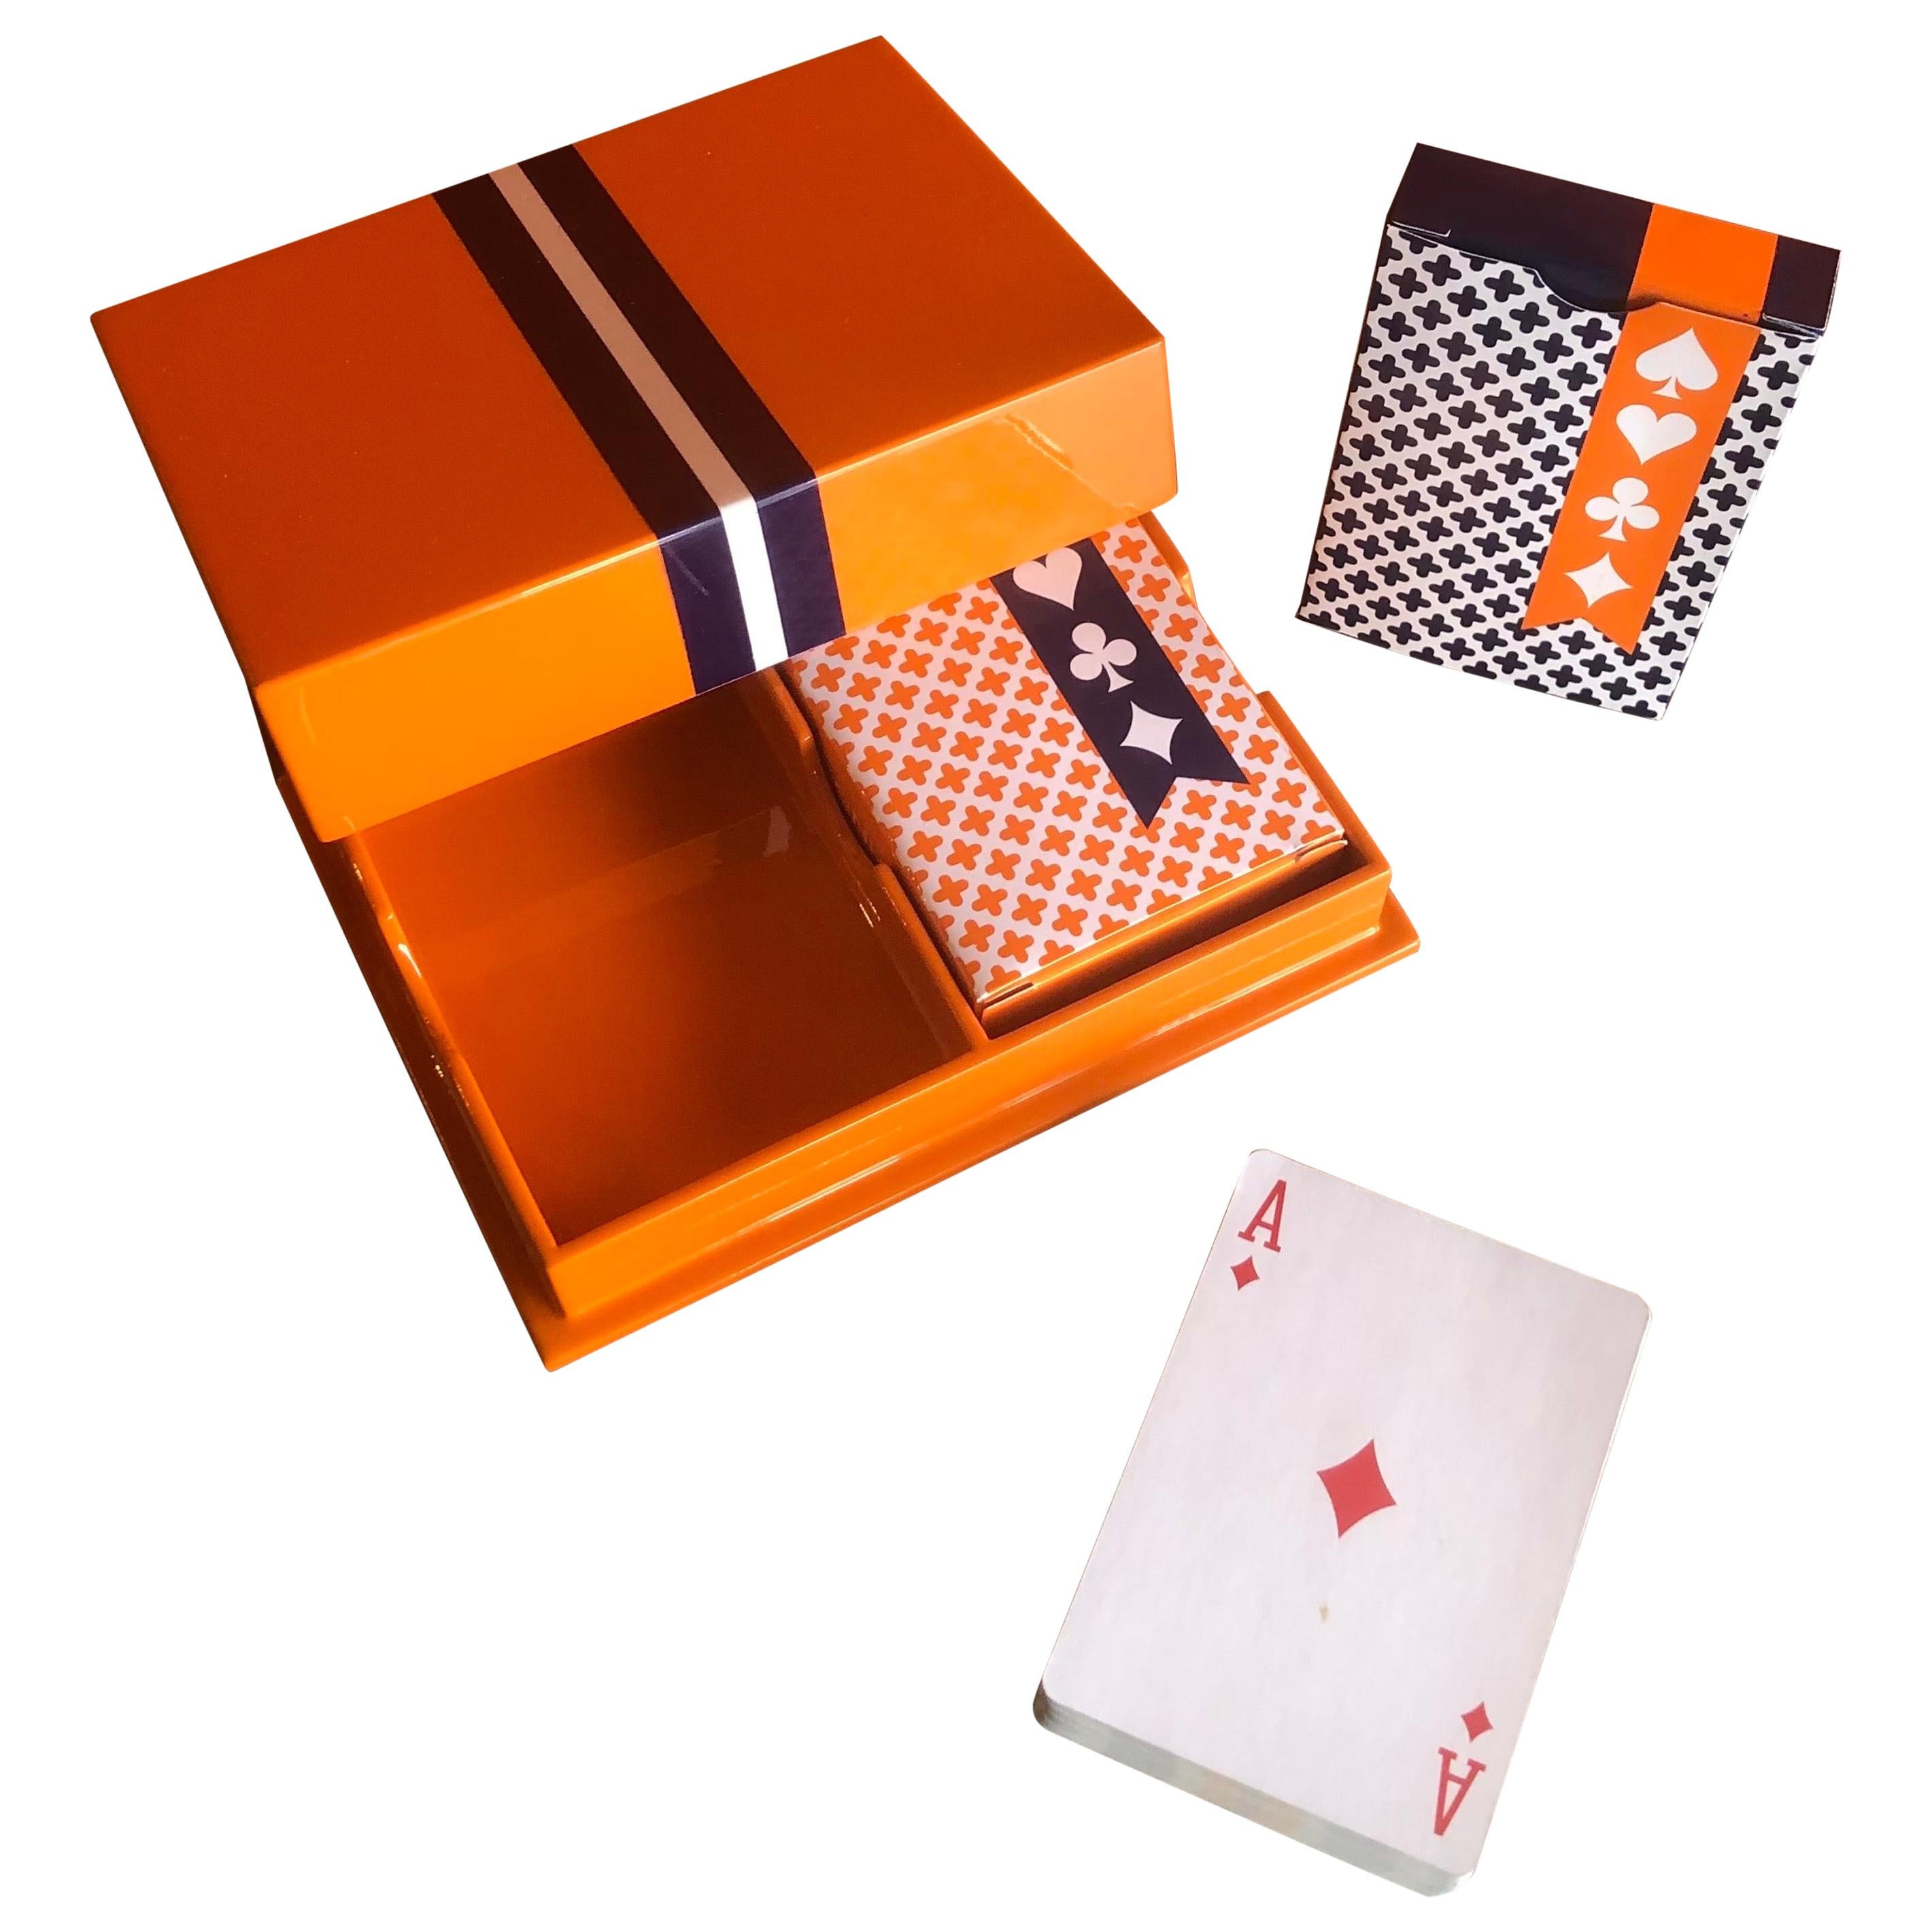 Playing Cards Set in Box by Jonathan Adler